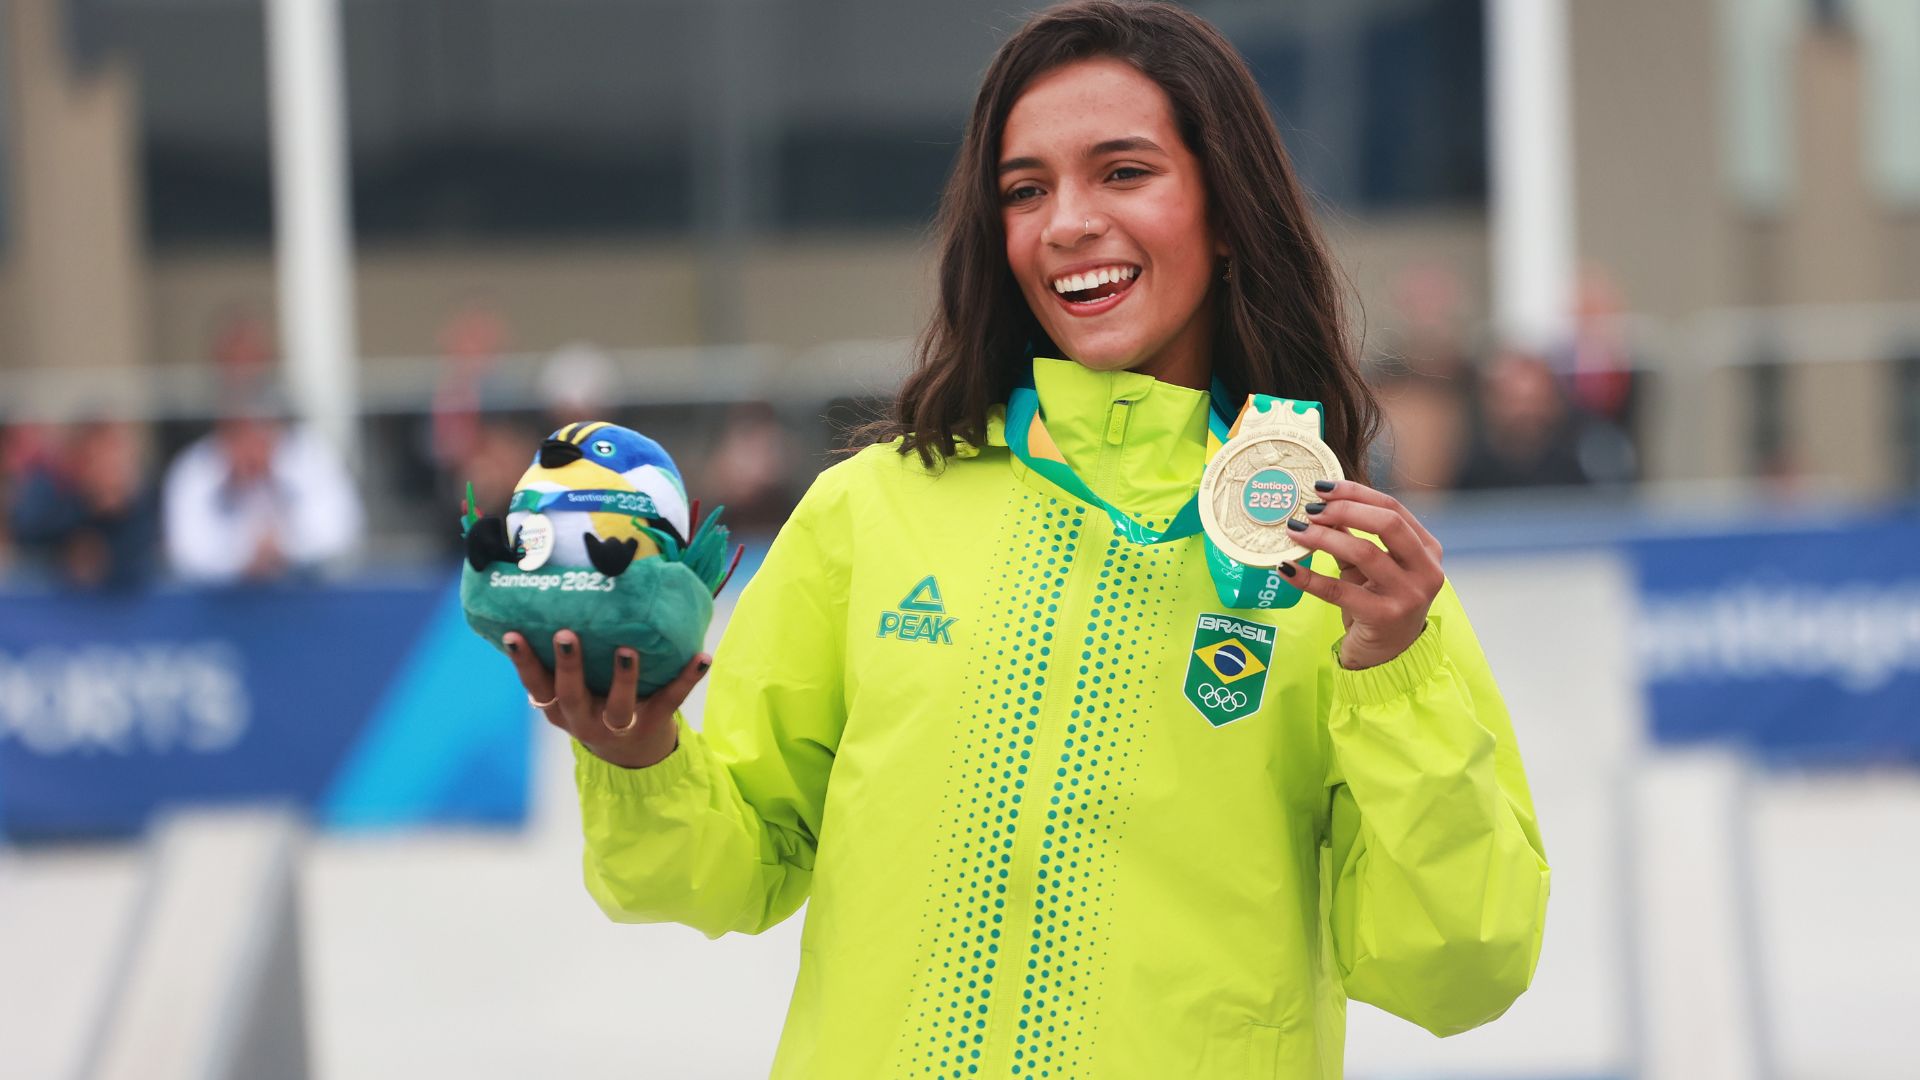 Rayssa Leal celebrates winning her gold medal at the age of 15 years old